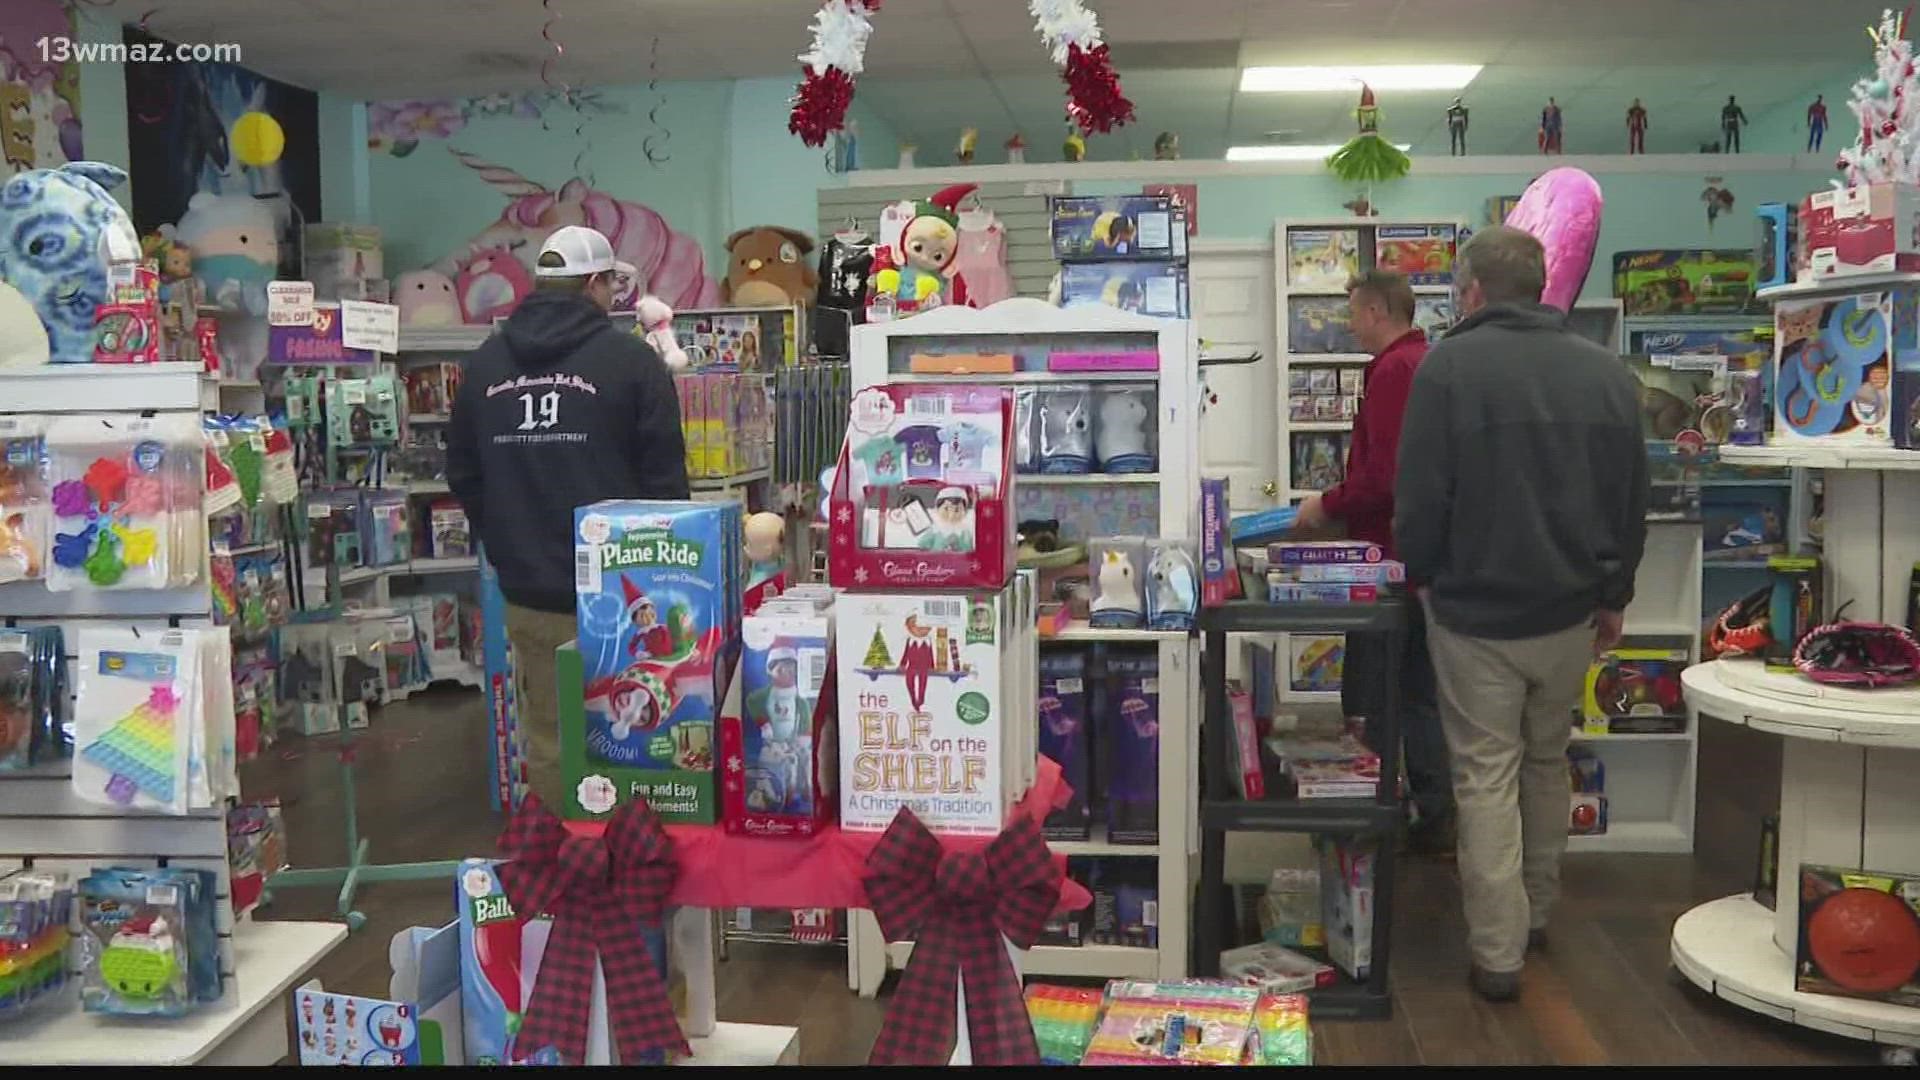 "Within the first day folks around Central Georgia have already contributed $4,000 to help make sure kids in Kentucky wake up to toys on Christmas morning.